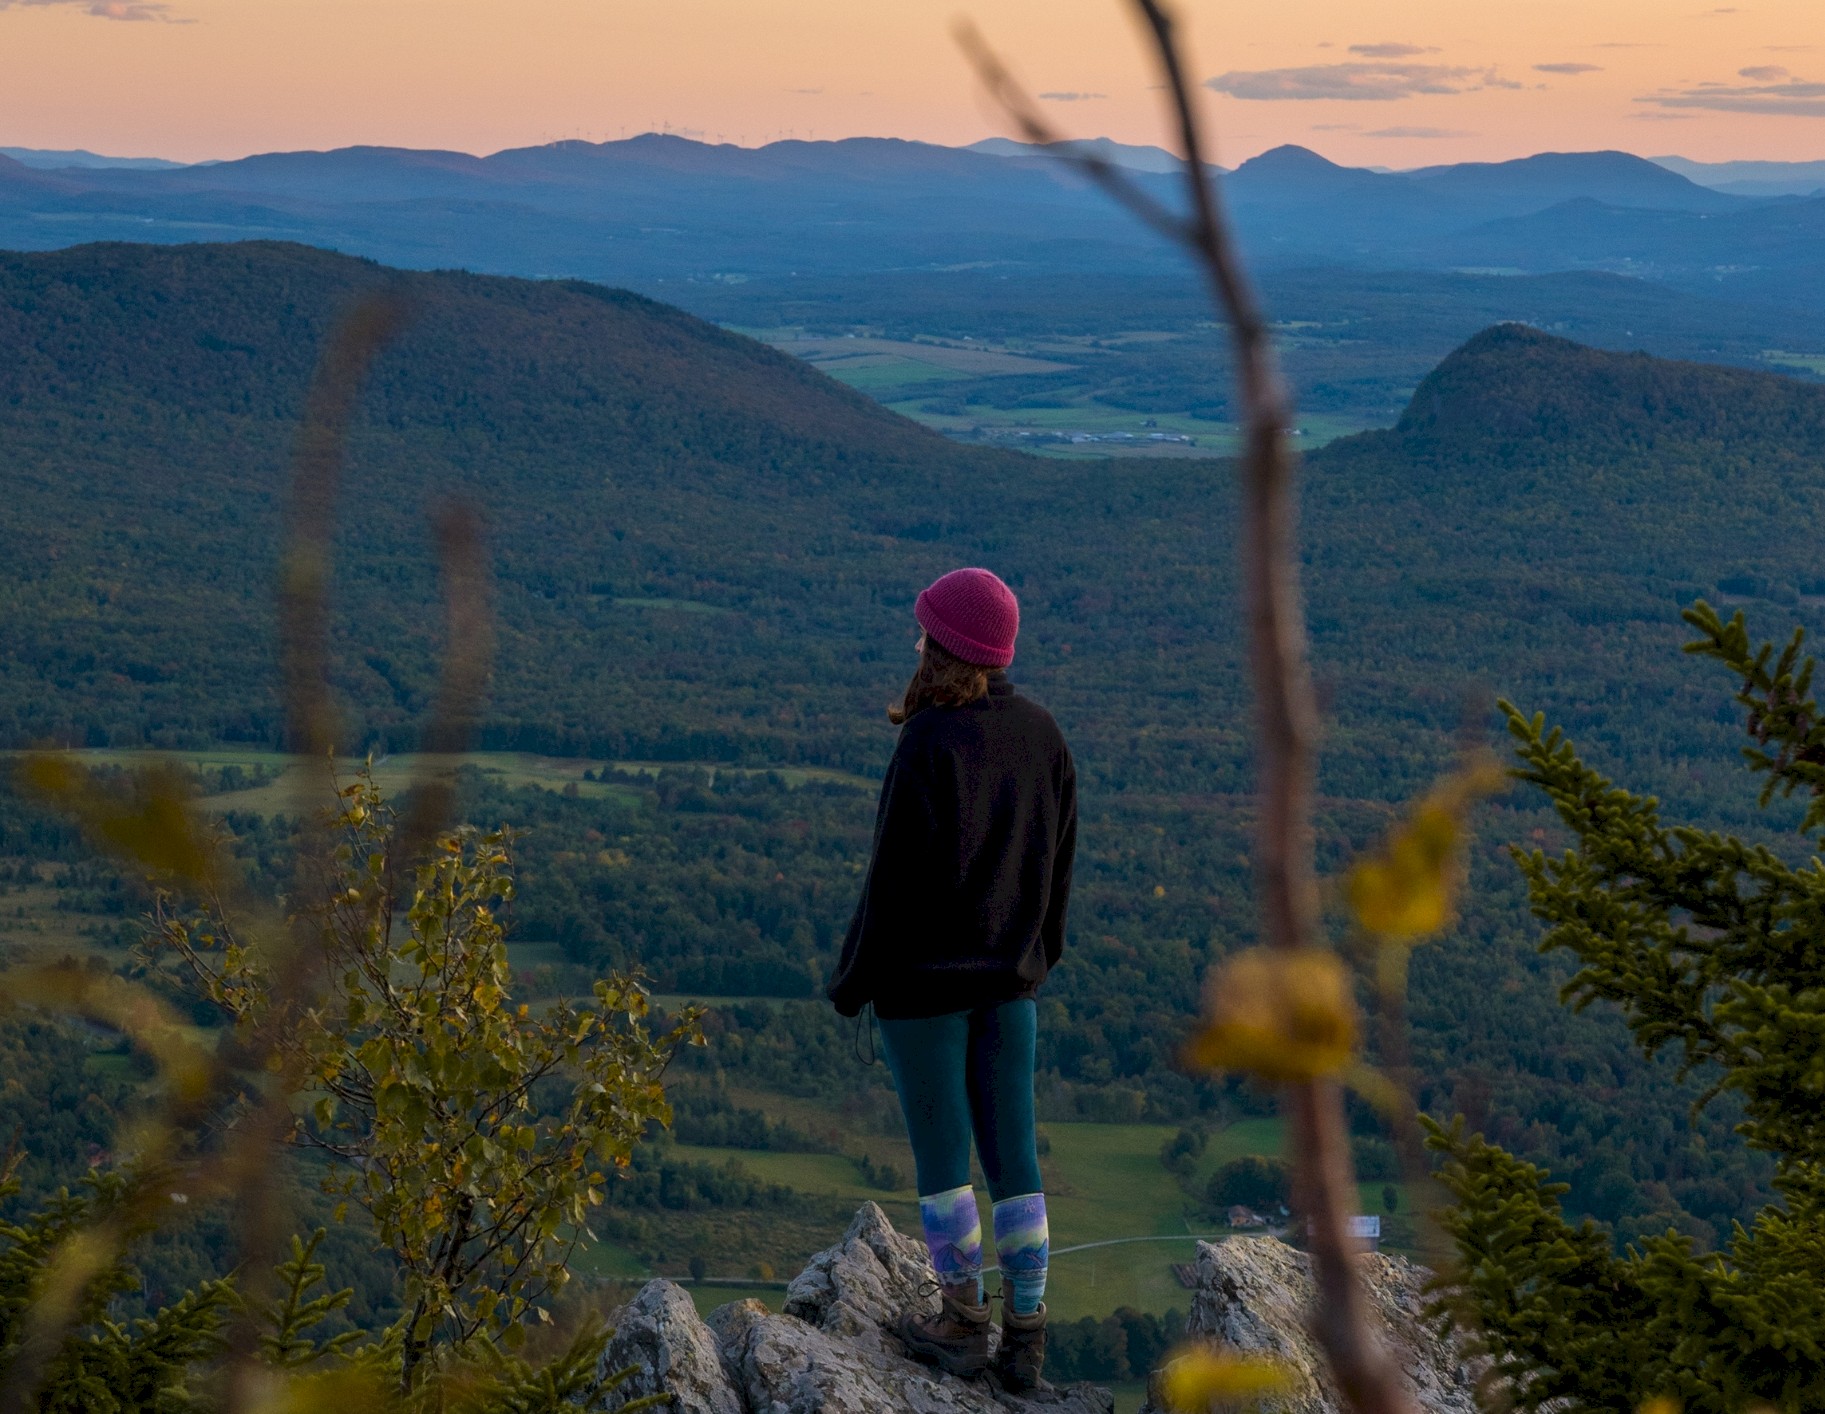 A woman enjoys the view from the top of a hill while hiking